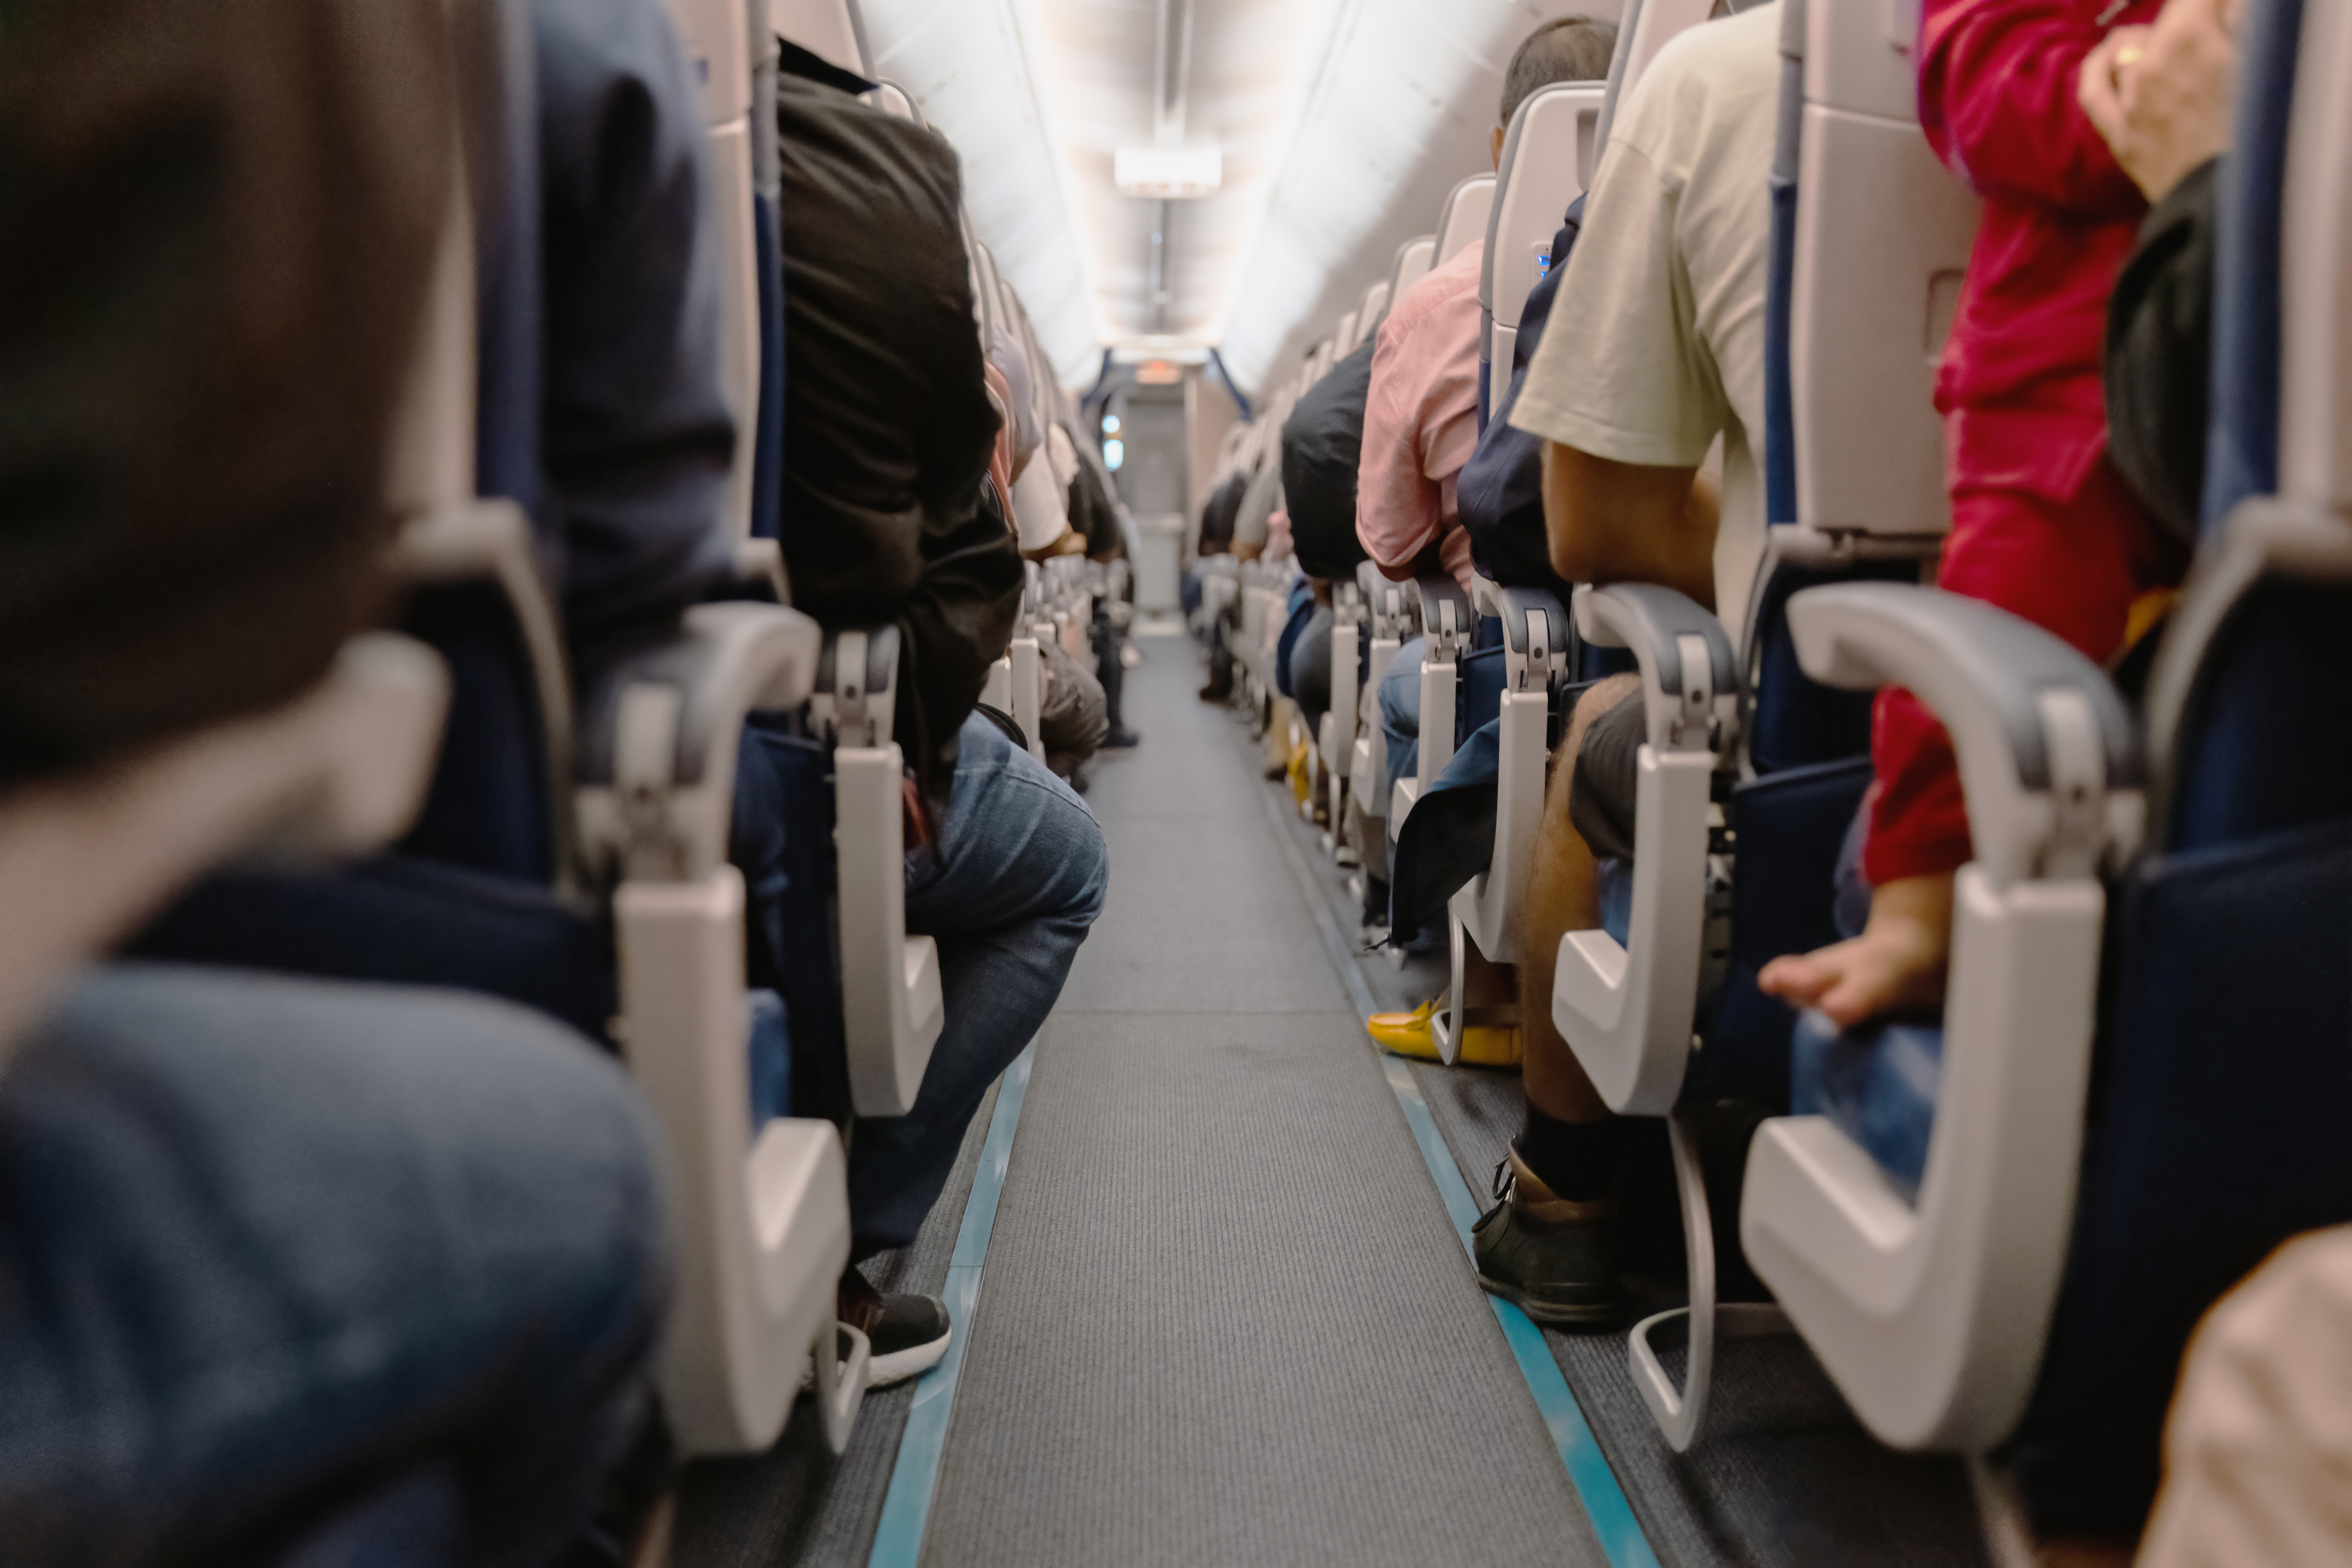 Passengers seated in an airplane aisle, focusing on the concept of business travel and work commute